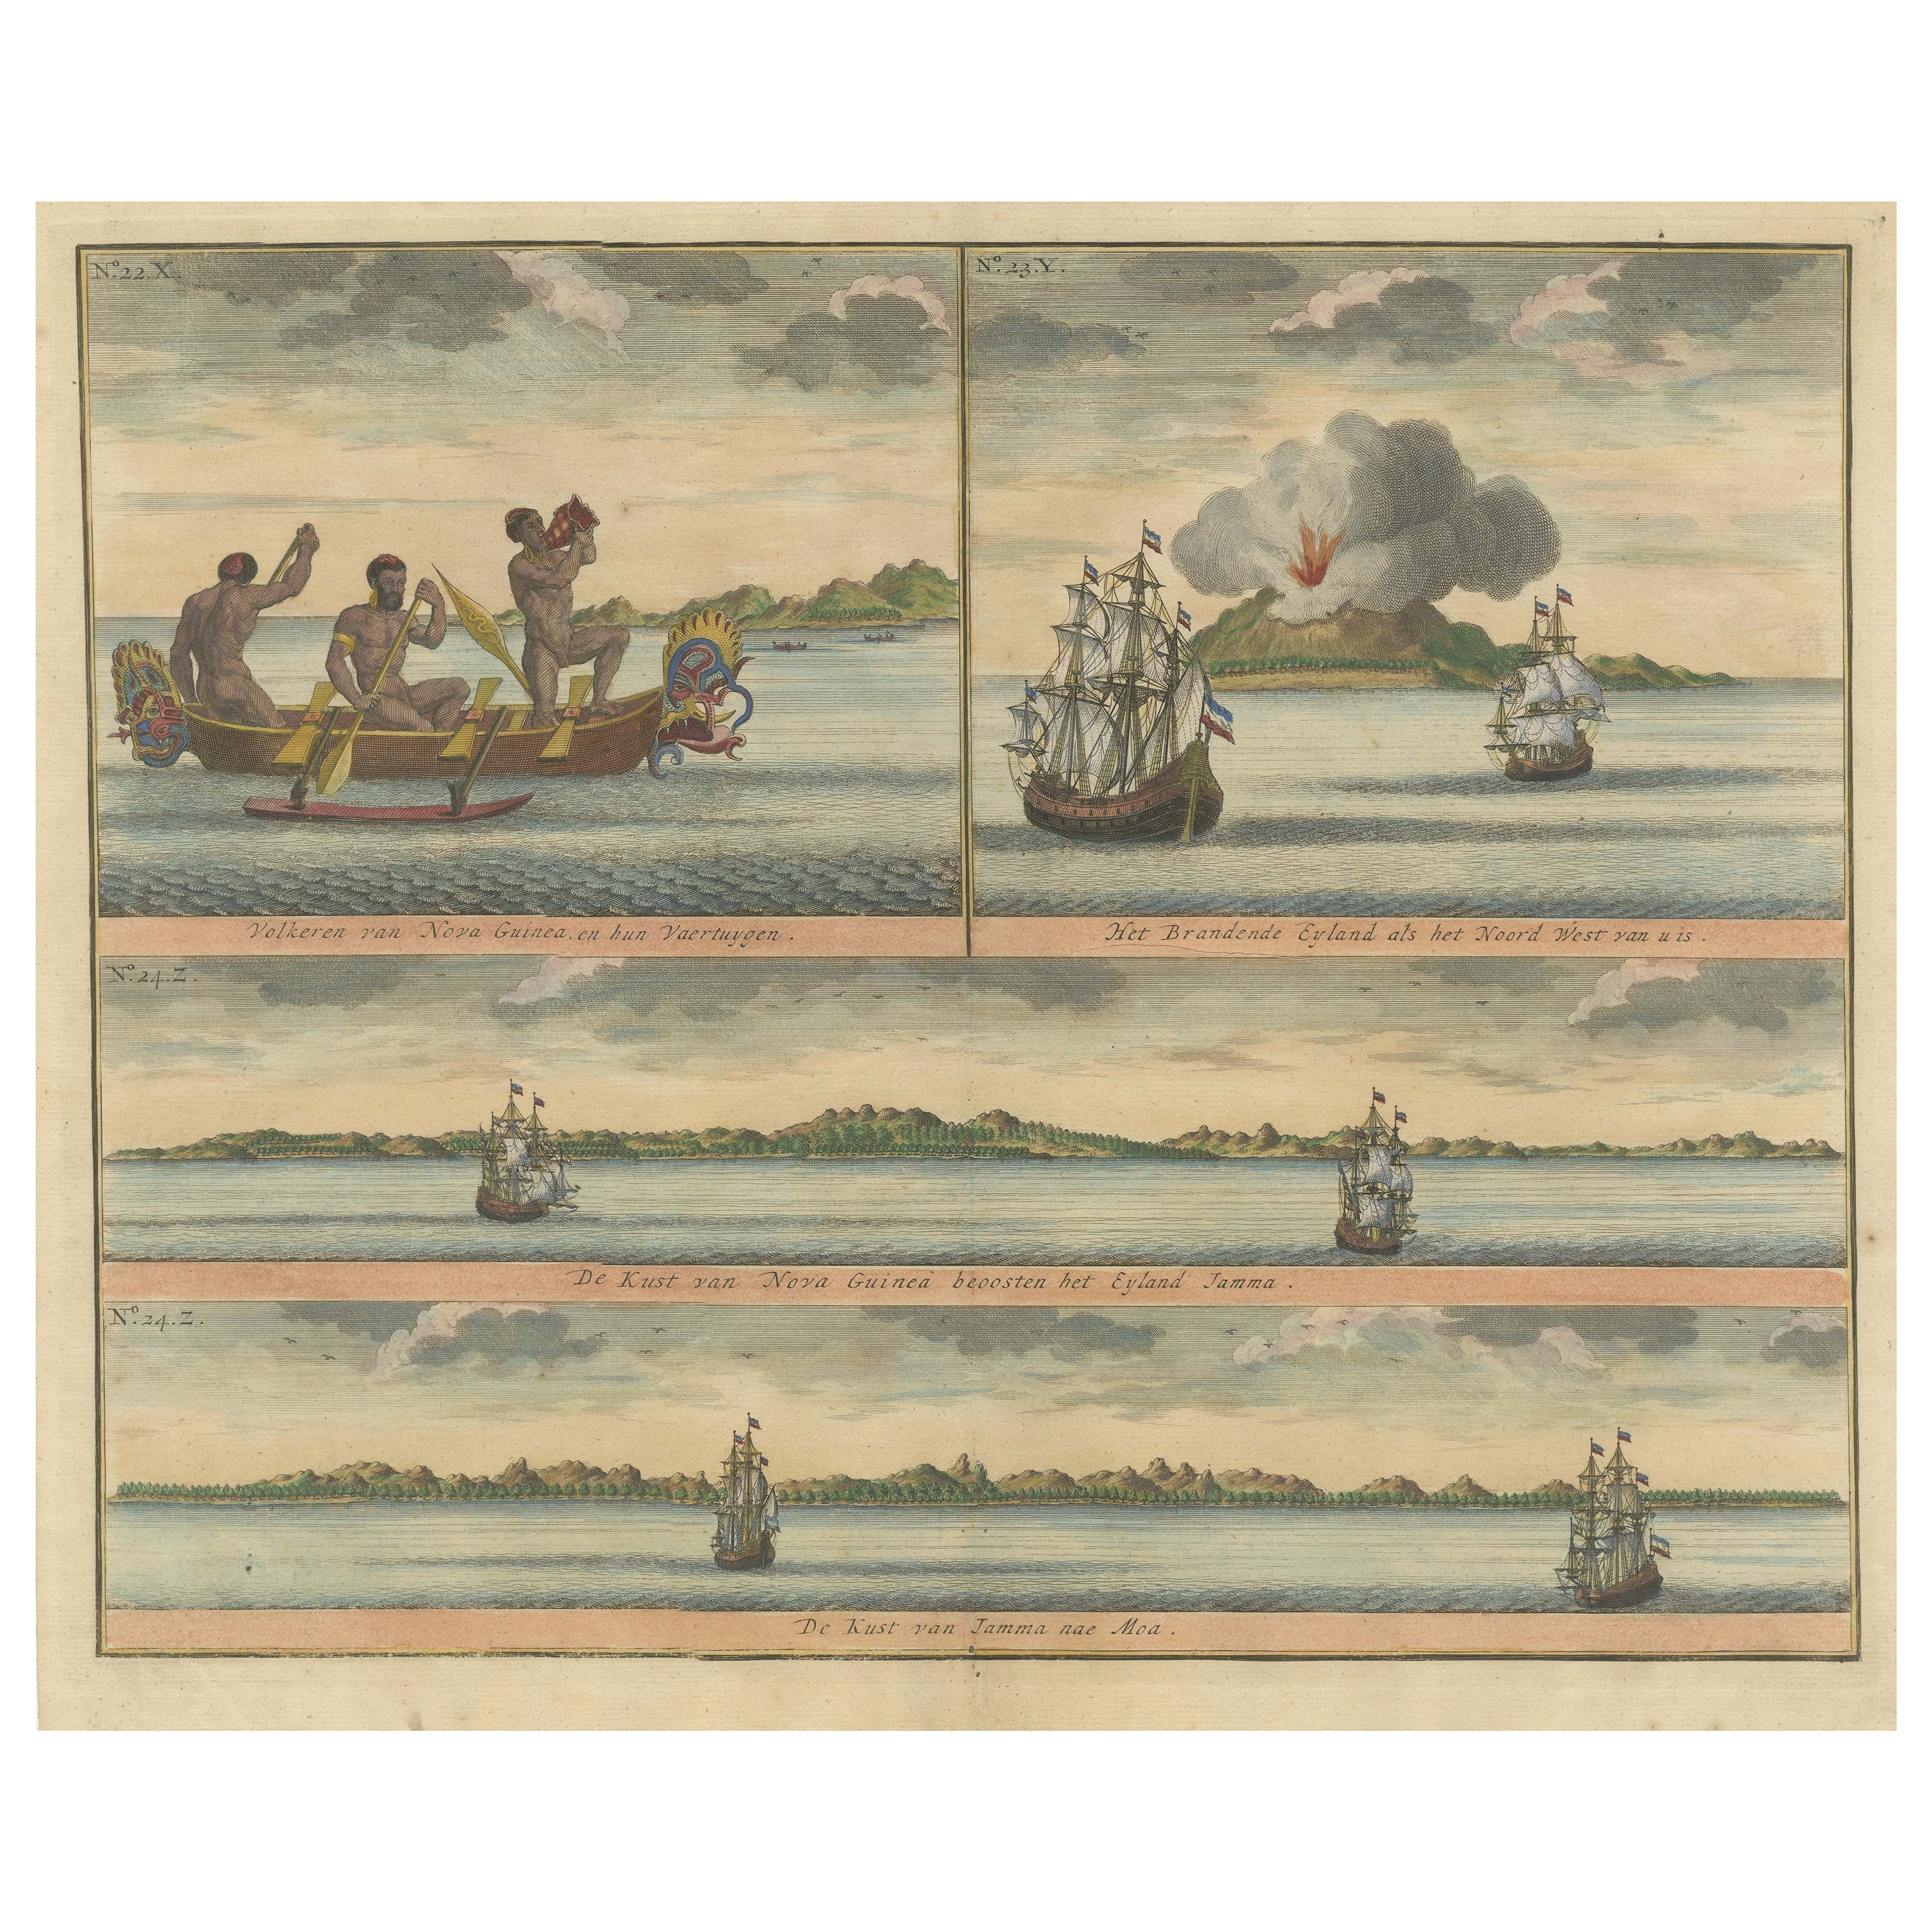 Colored Antique Print of New Guinea Fishermen and views of New Guinea For Sale